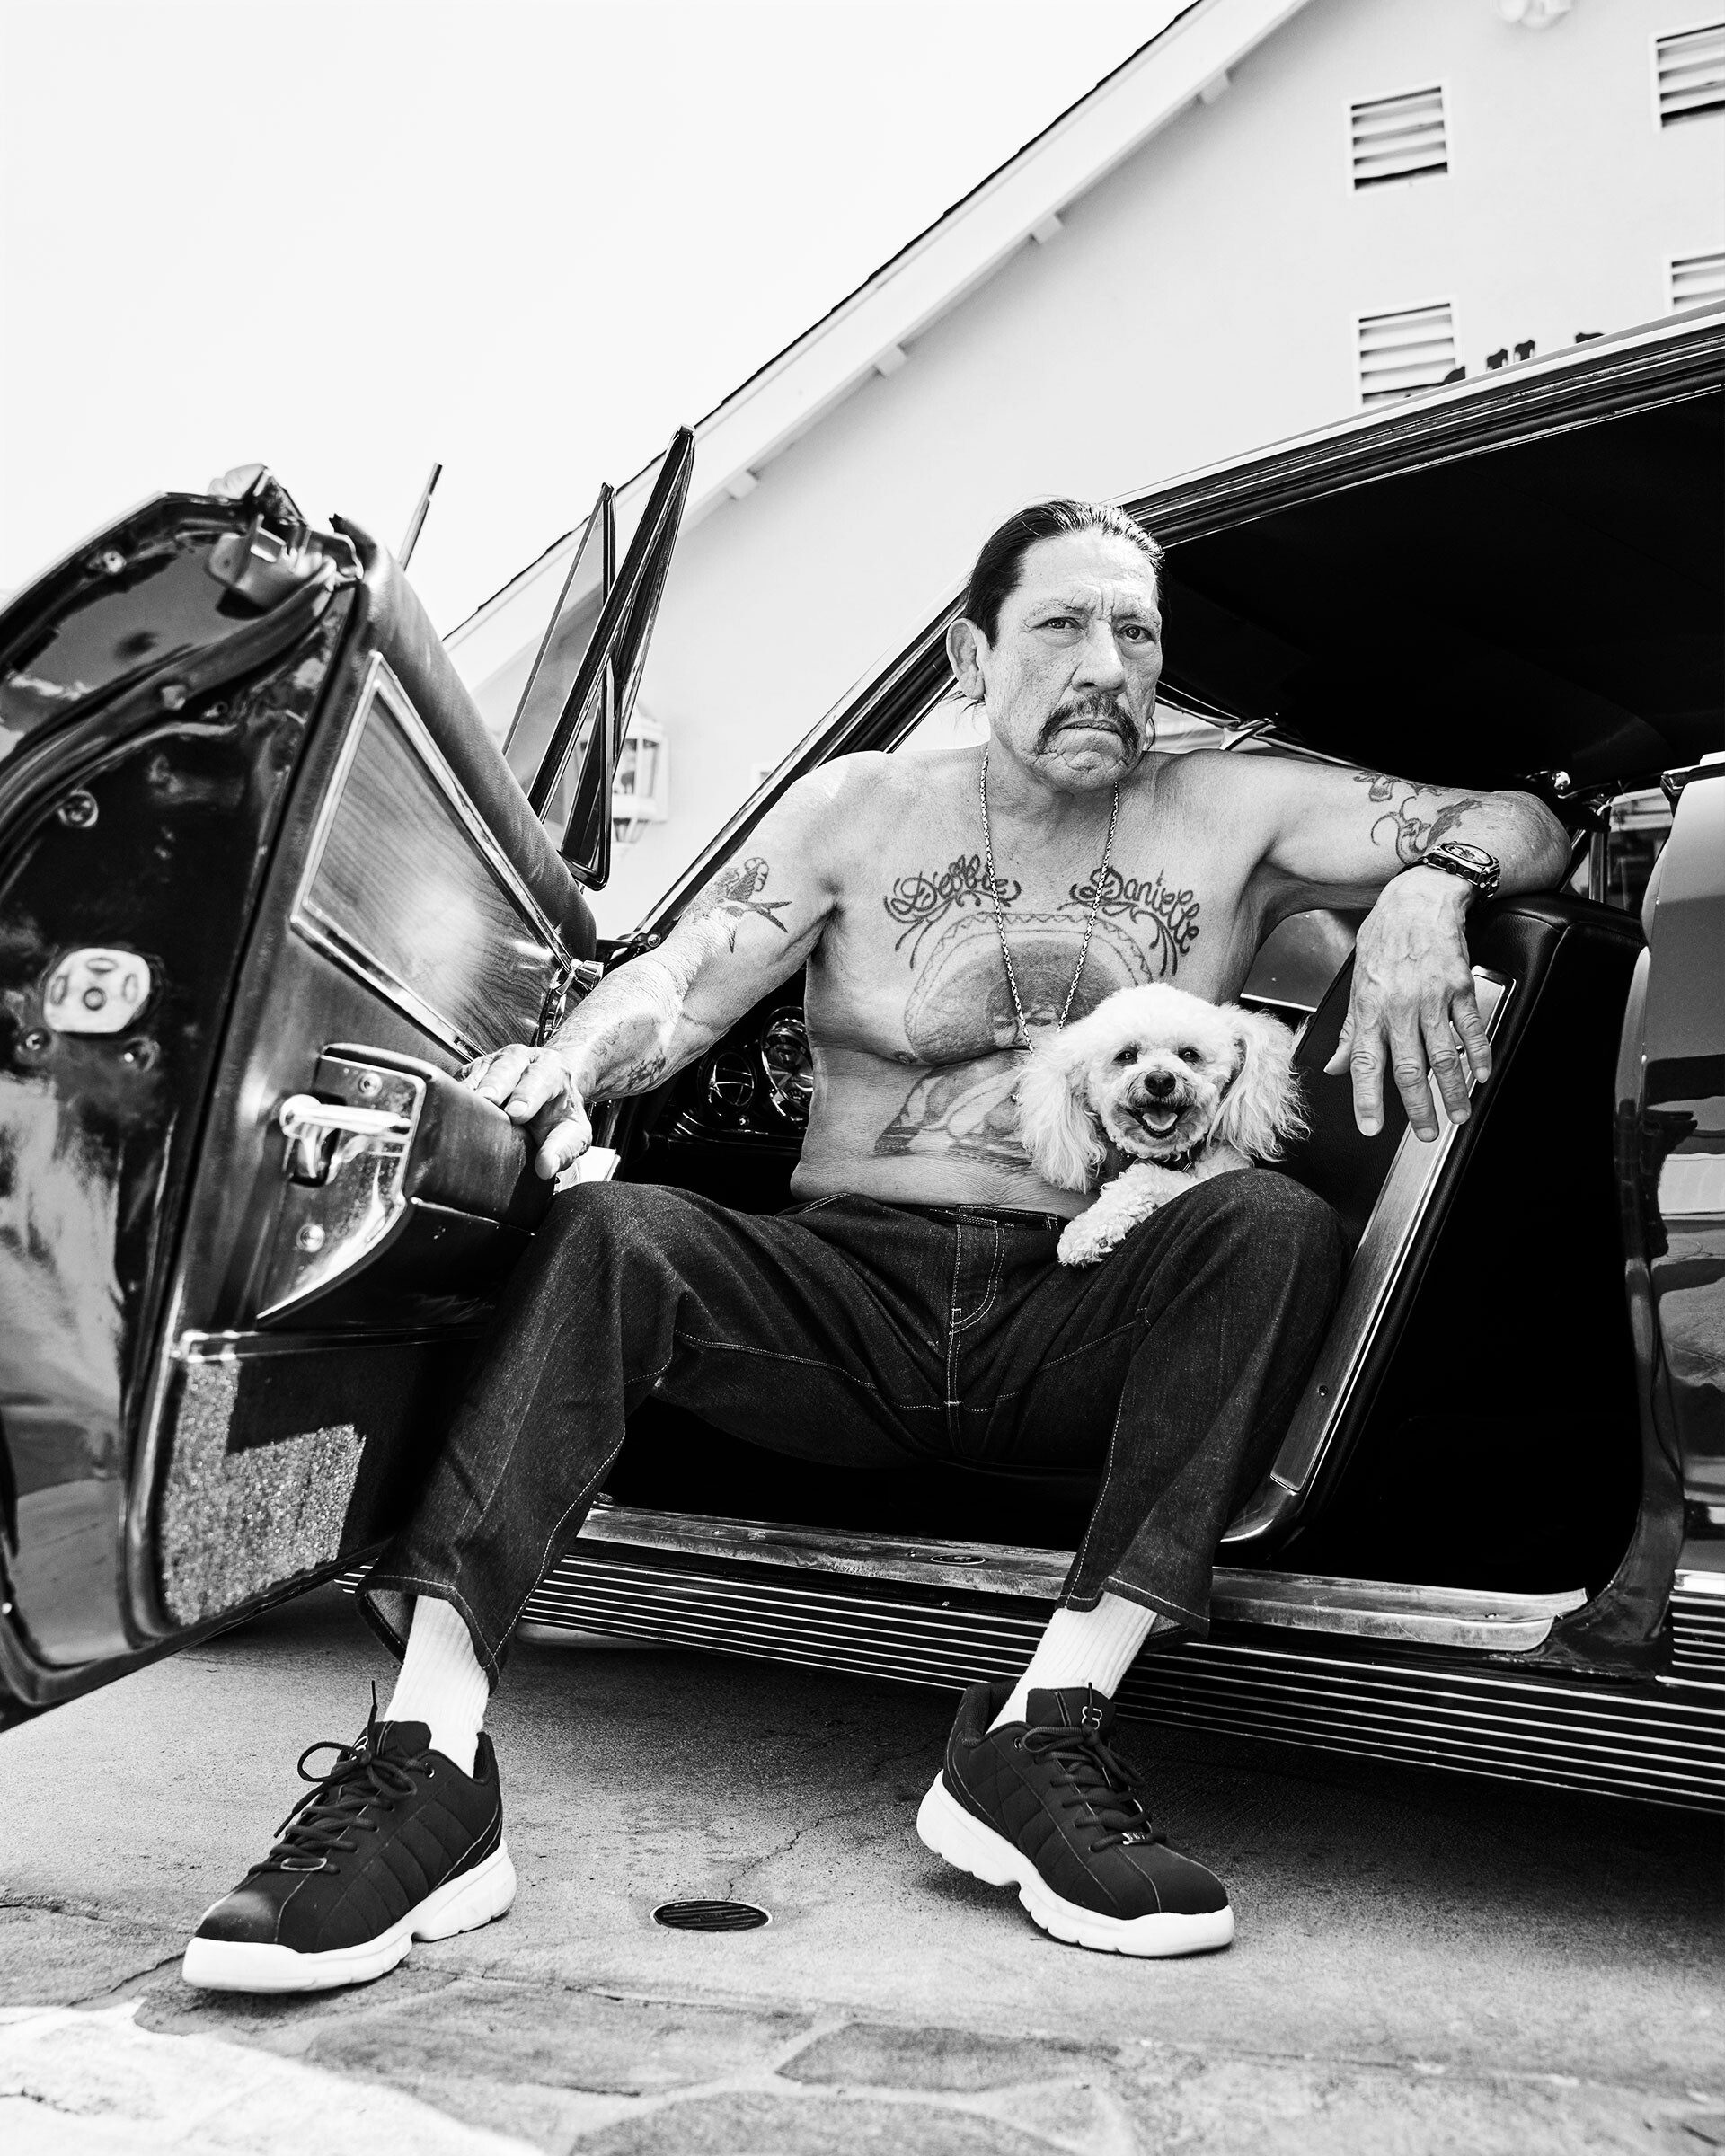 Danny Trejo: Danny Trejo's dog, Zelda, Black and white, Decades-long film career, Synonymous with the character Machete. 1920x2400 HD Background.